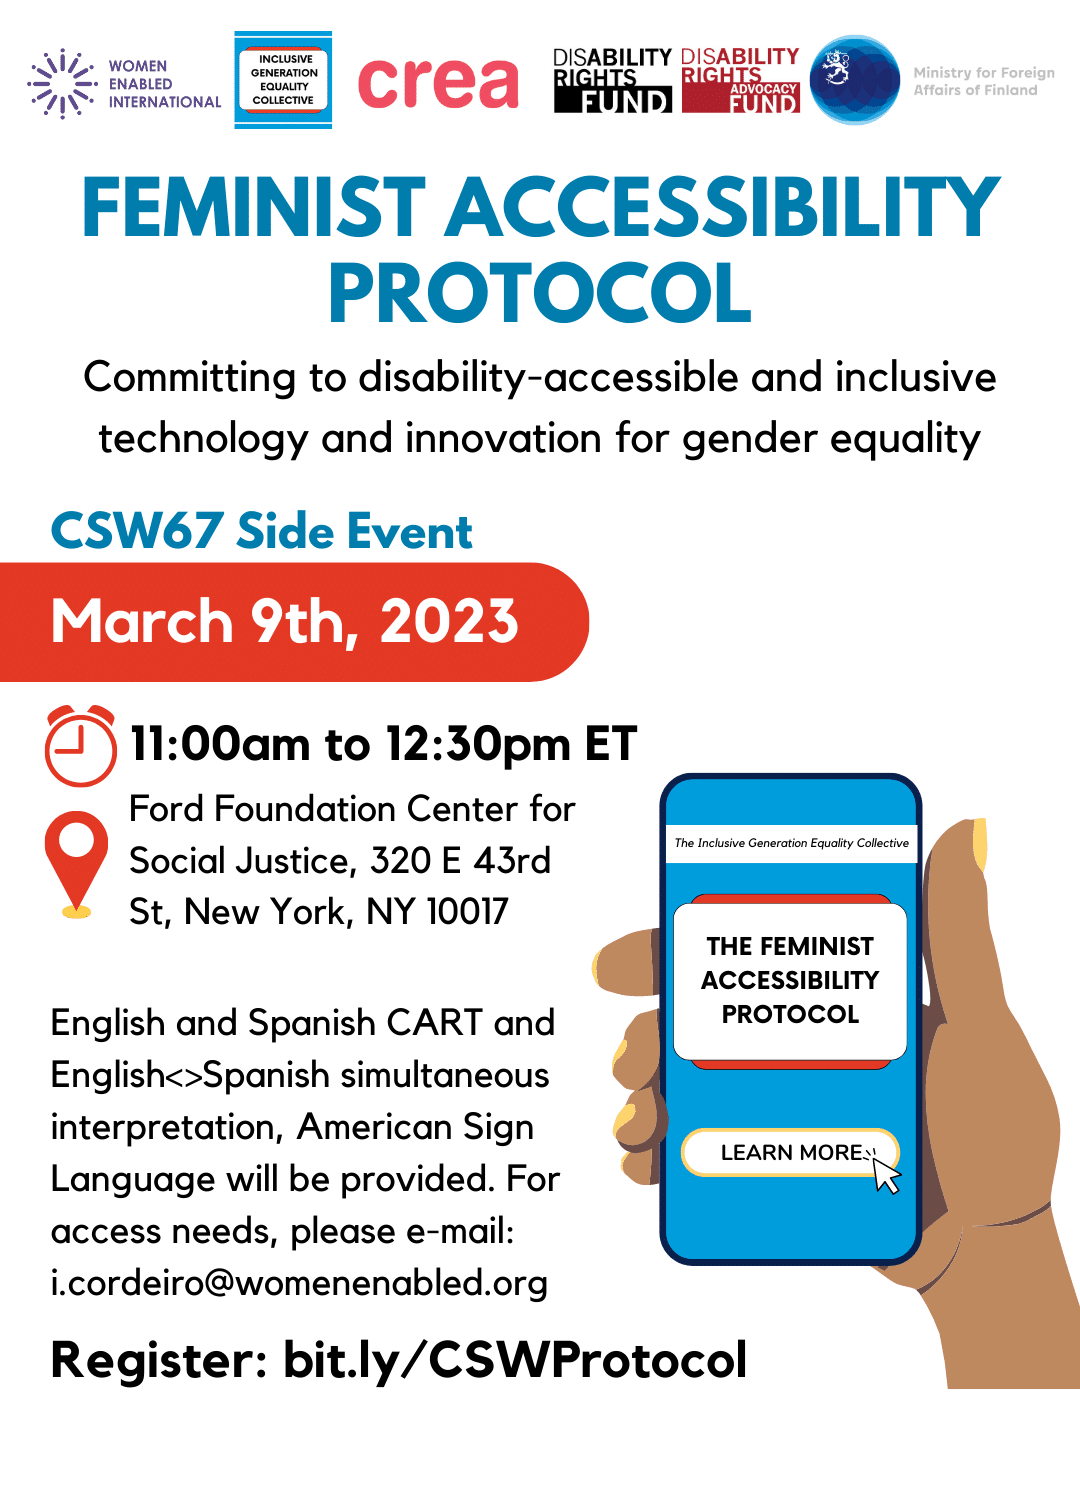 Flyer with event information, sponsor logos, and a graphic of a hand holding a phone with the screen showing the cover of the Feminist Accessibility Protocol.